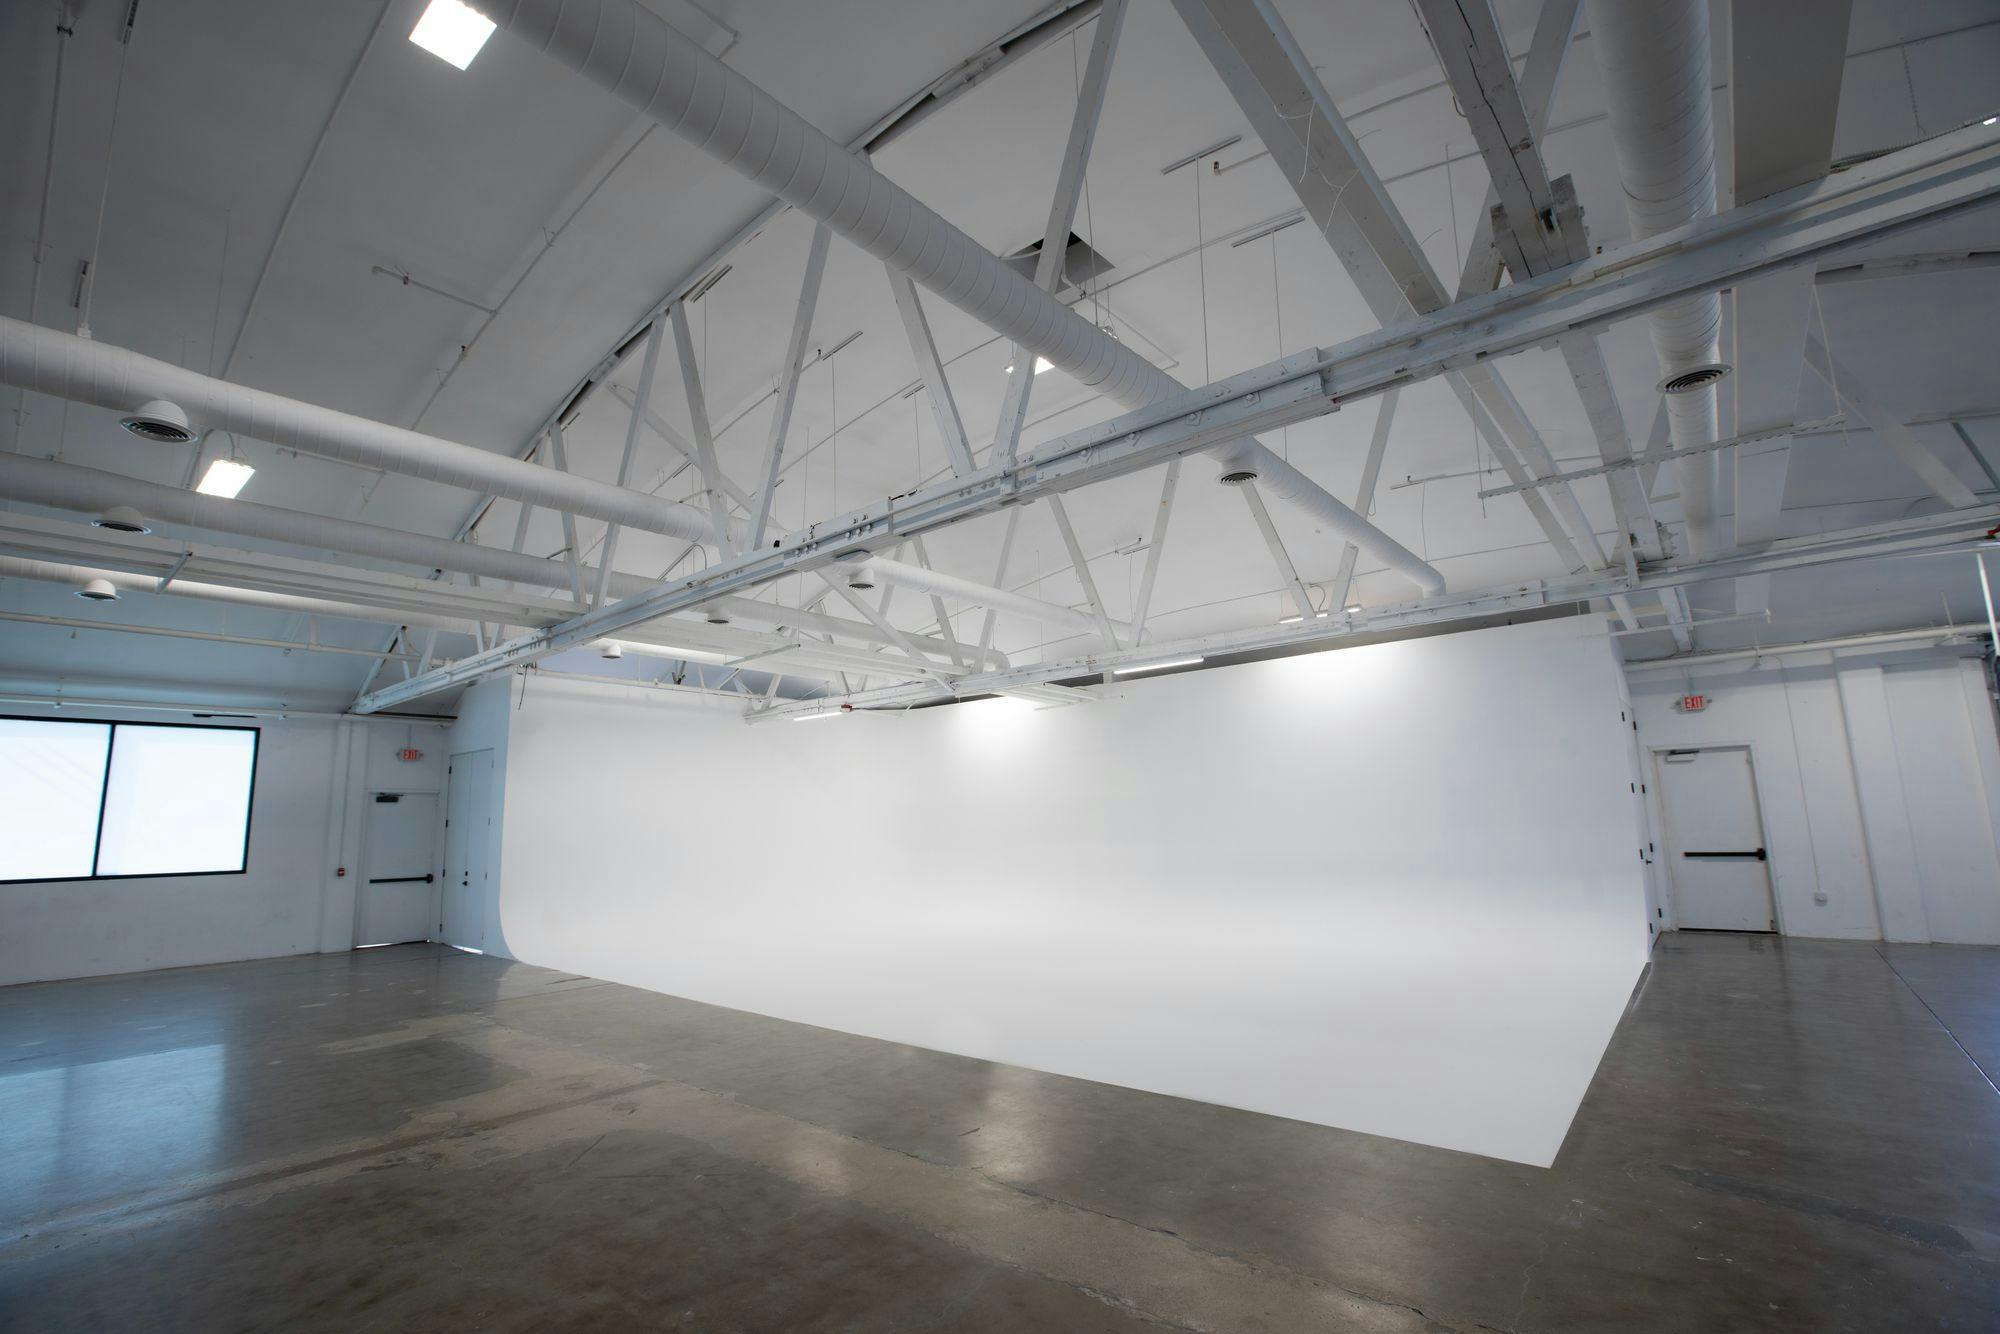 A spacious industrial-style gallery with white walls and high ceilings, featuring a large blank white cyclorama on the right side and a concrete floor.